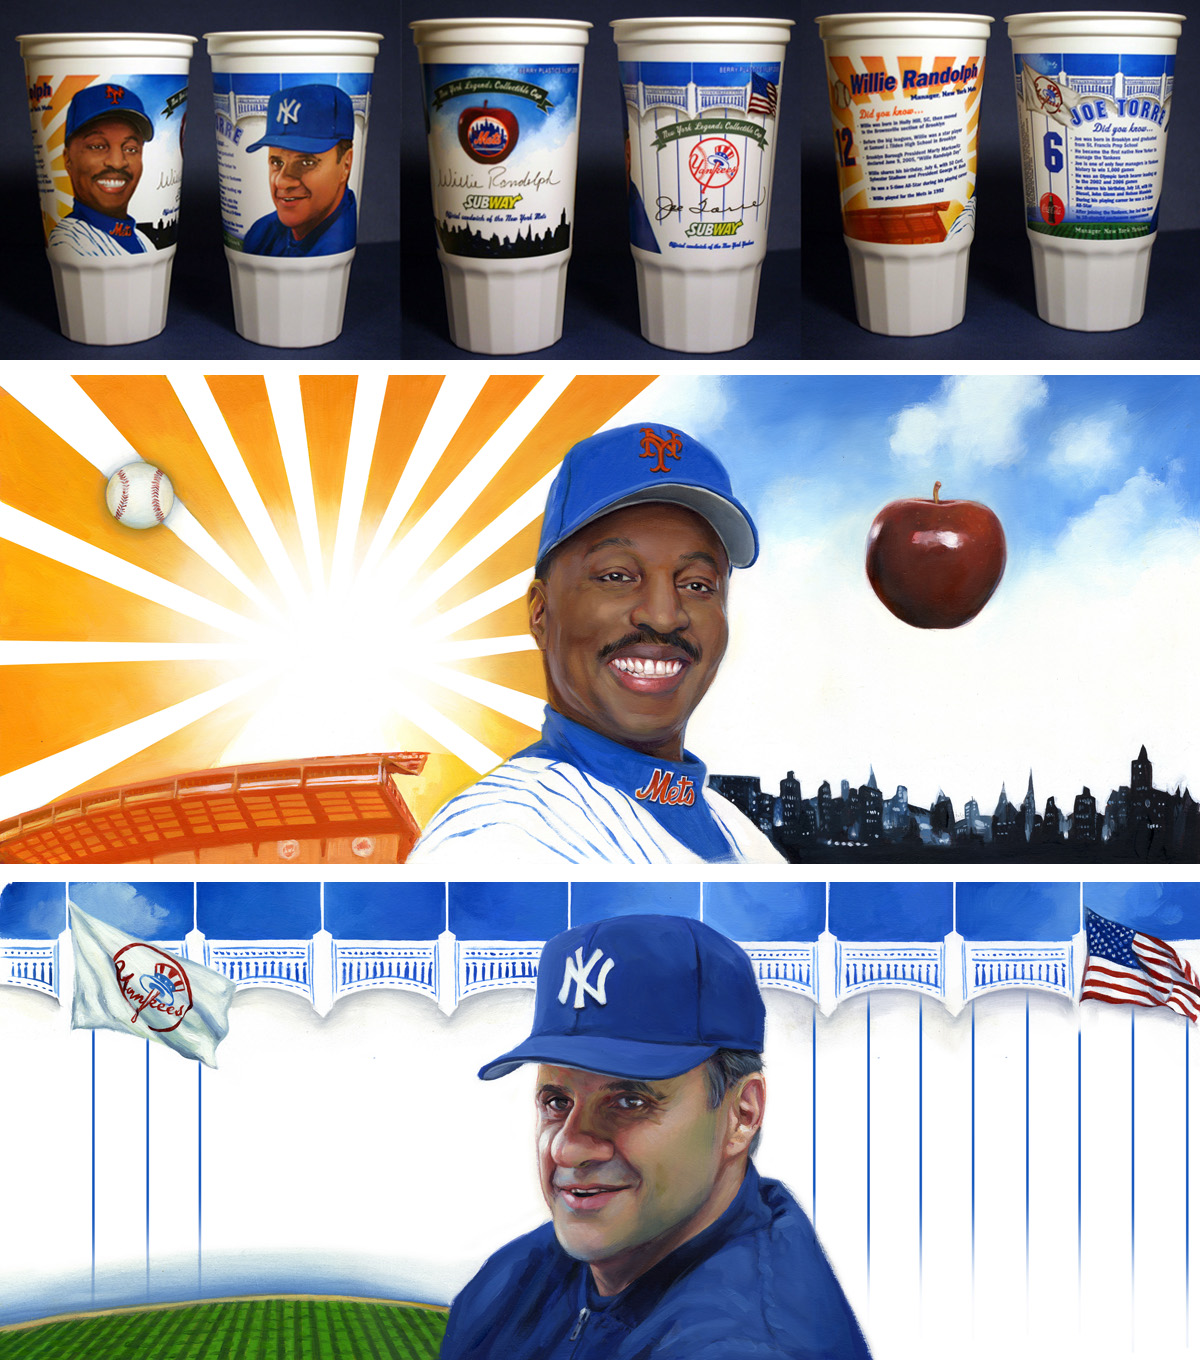 'MLB Coaches Willie Randolph and Joe Torre', for Subway, 2006